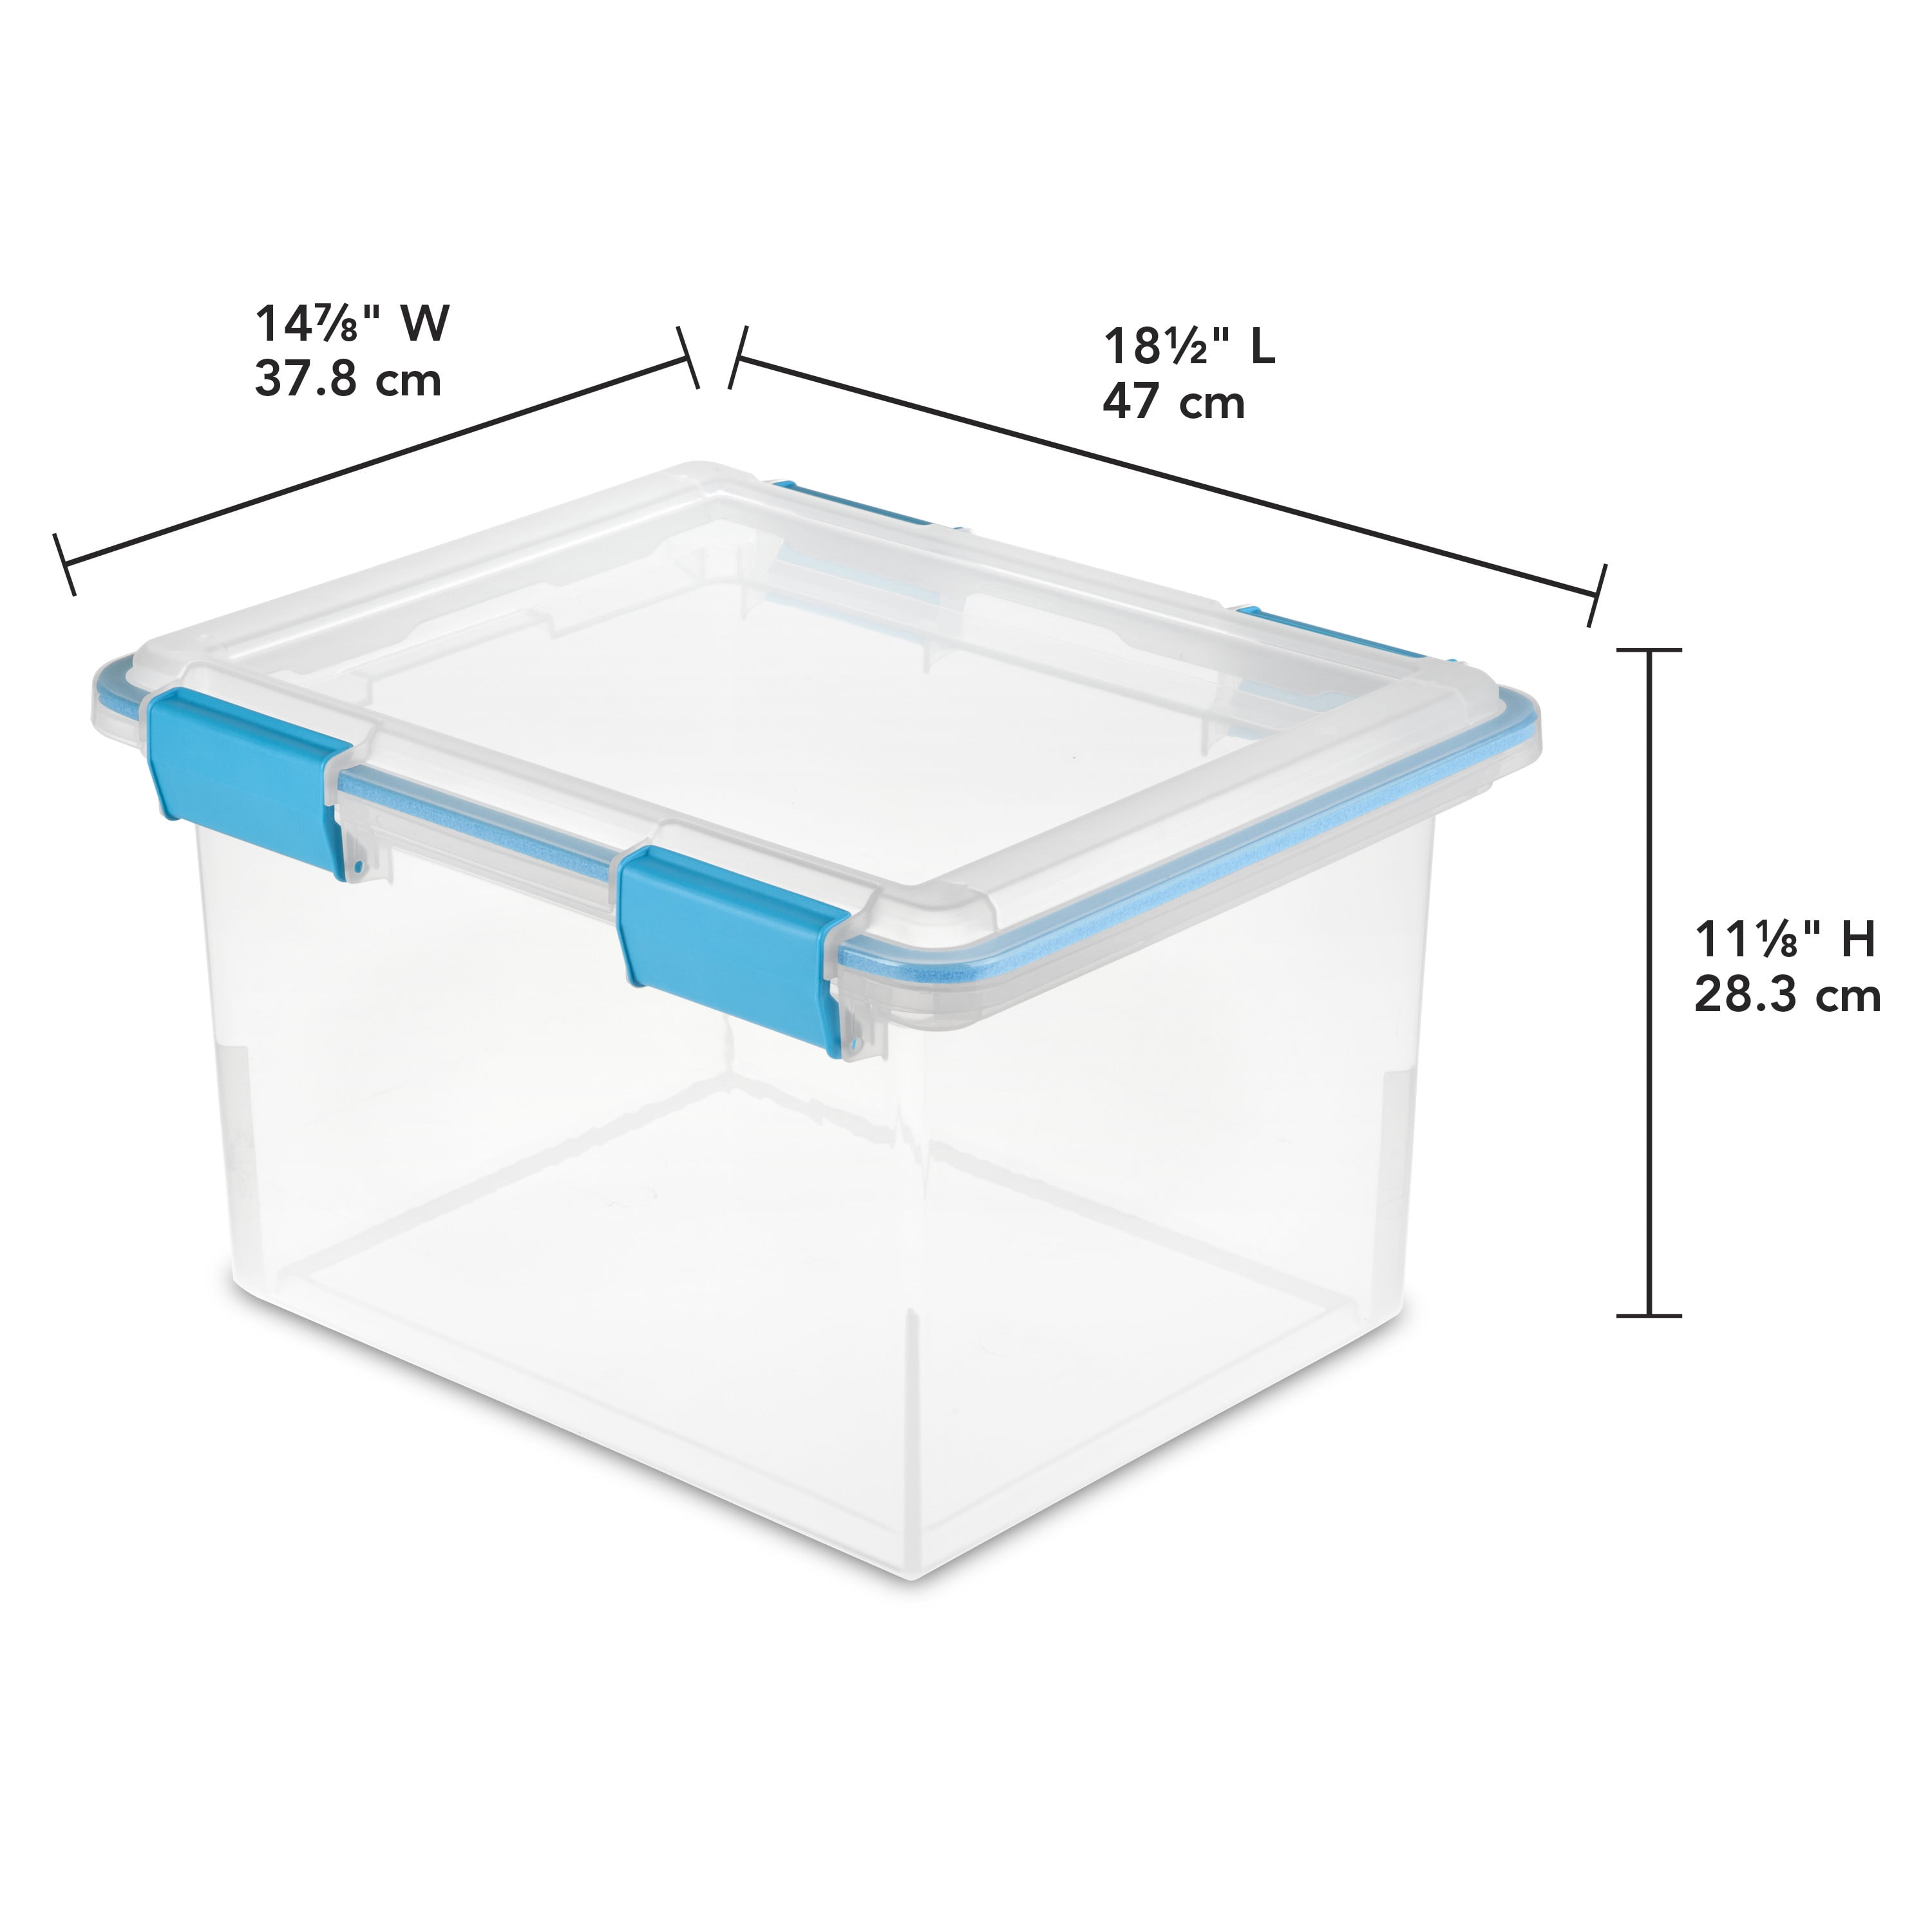 Buy Sterilite® 32-Quart Storage Container With Gasket at S&S Worldwide